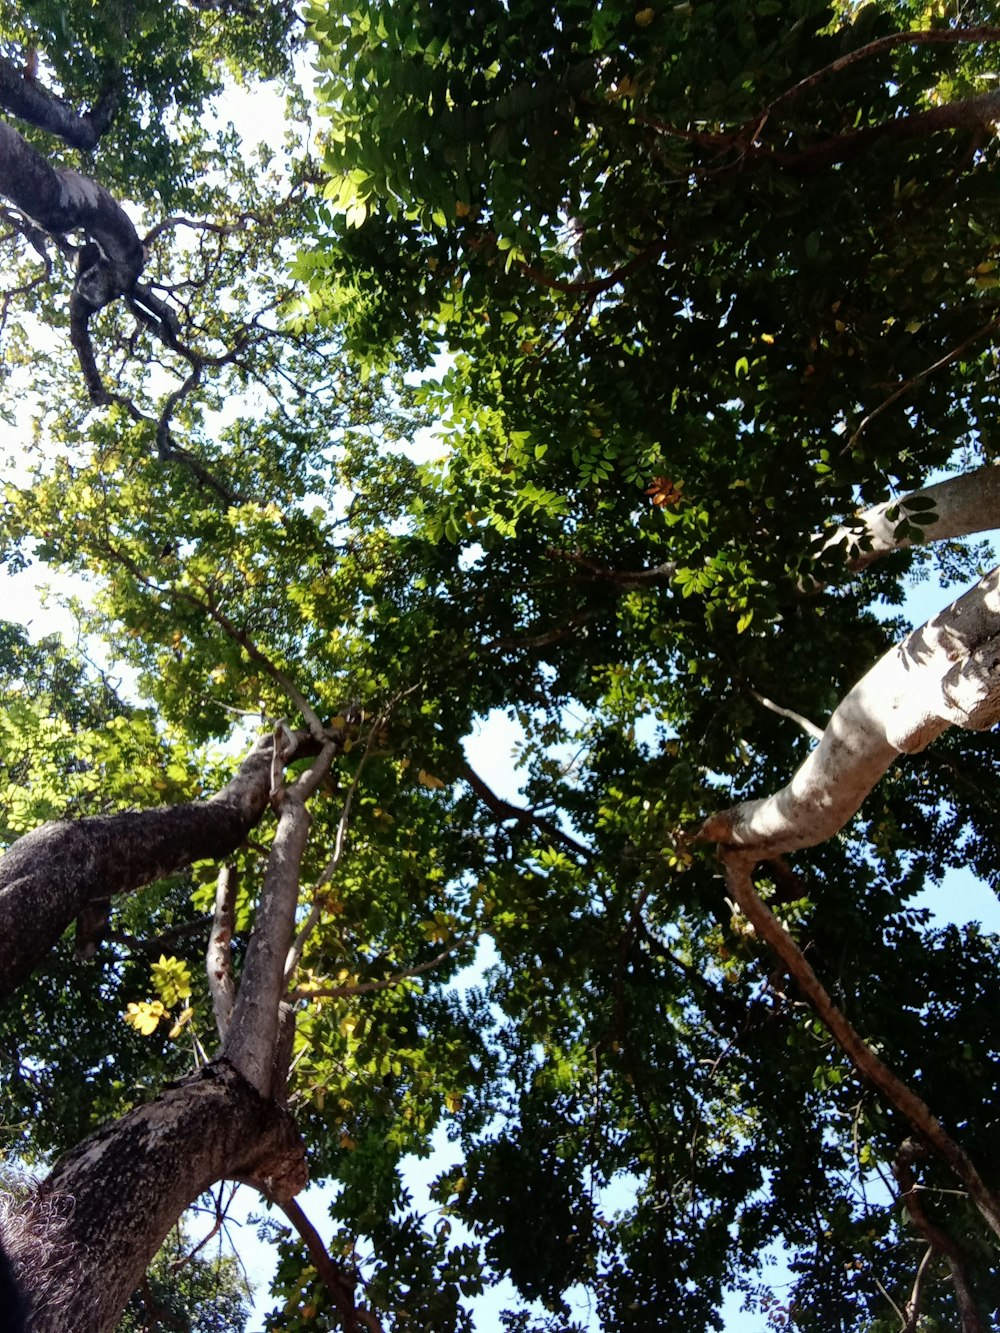 looking up into the canopy of a tree